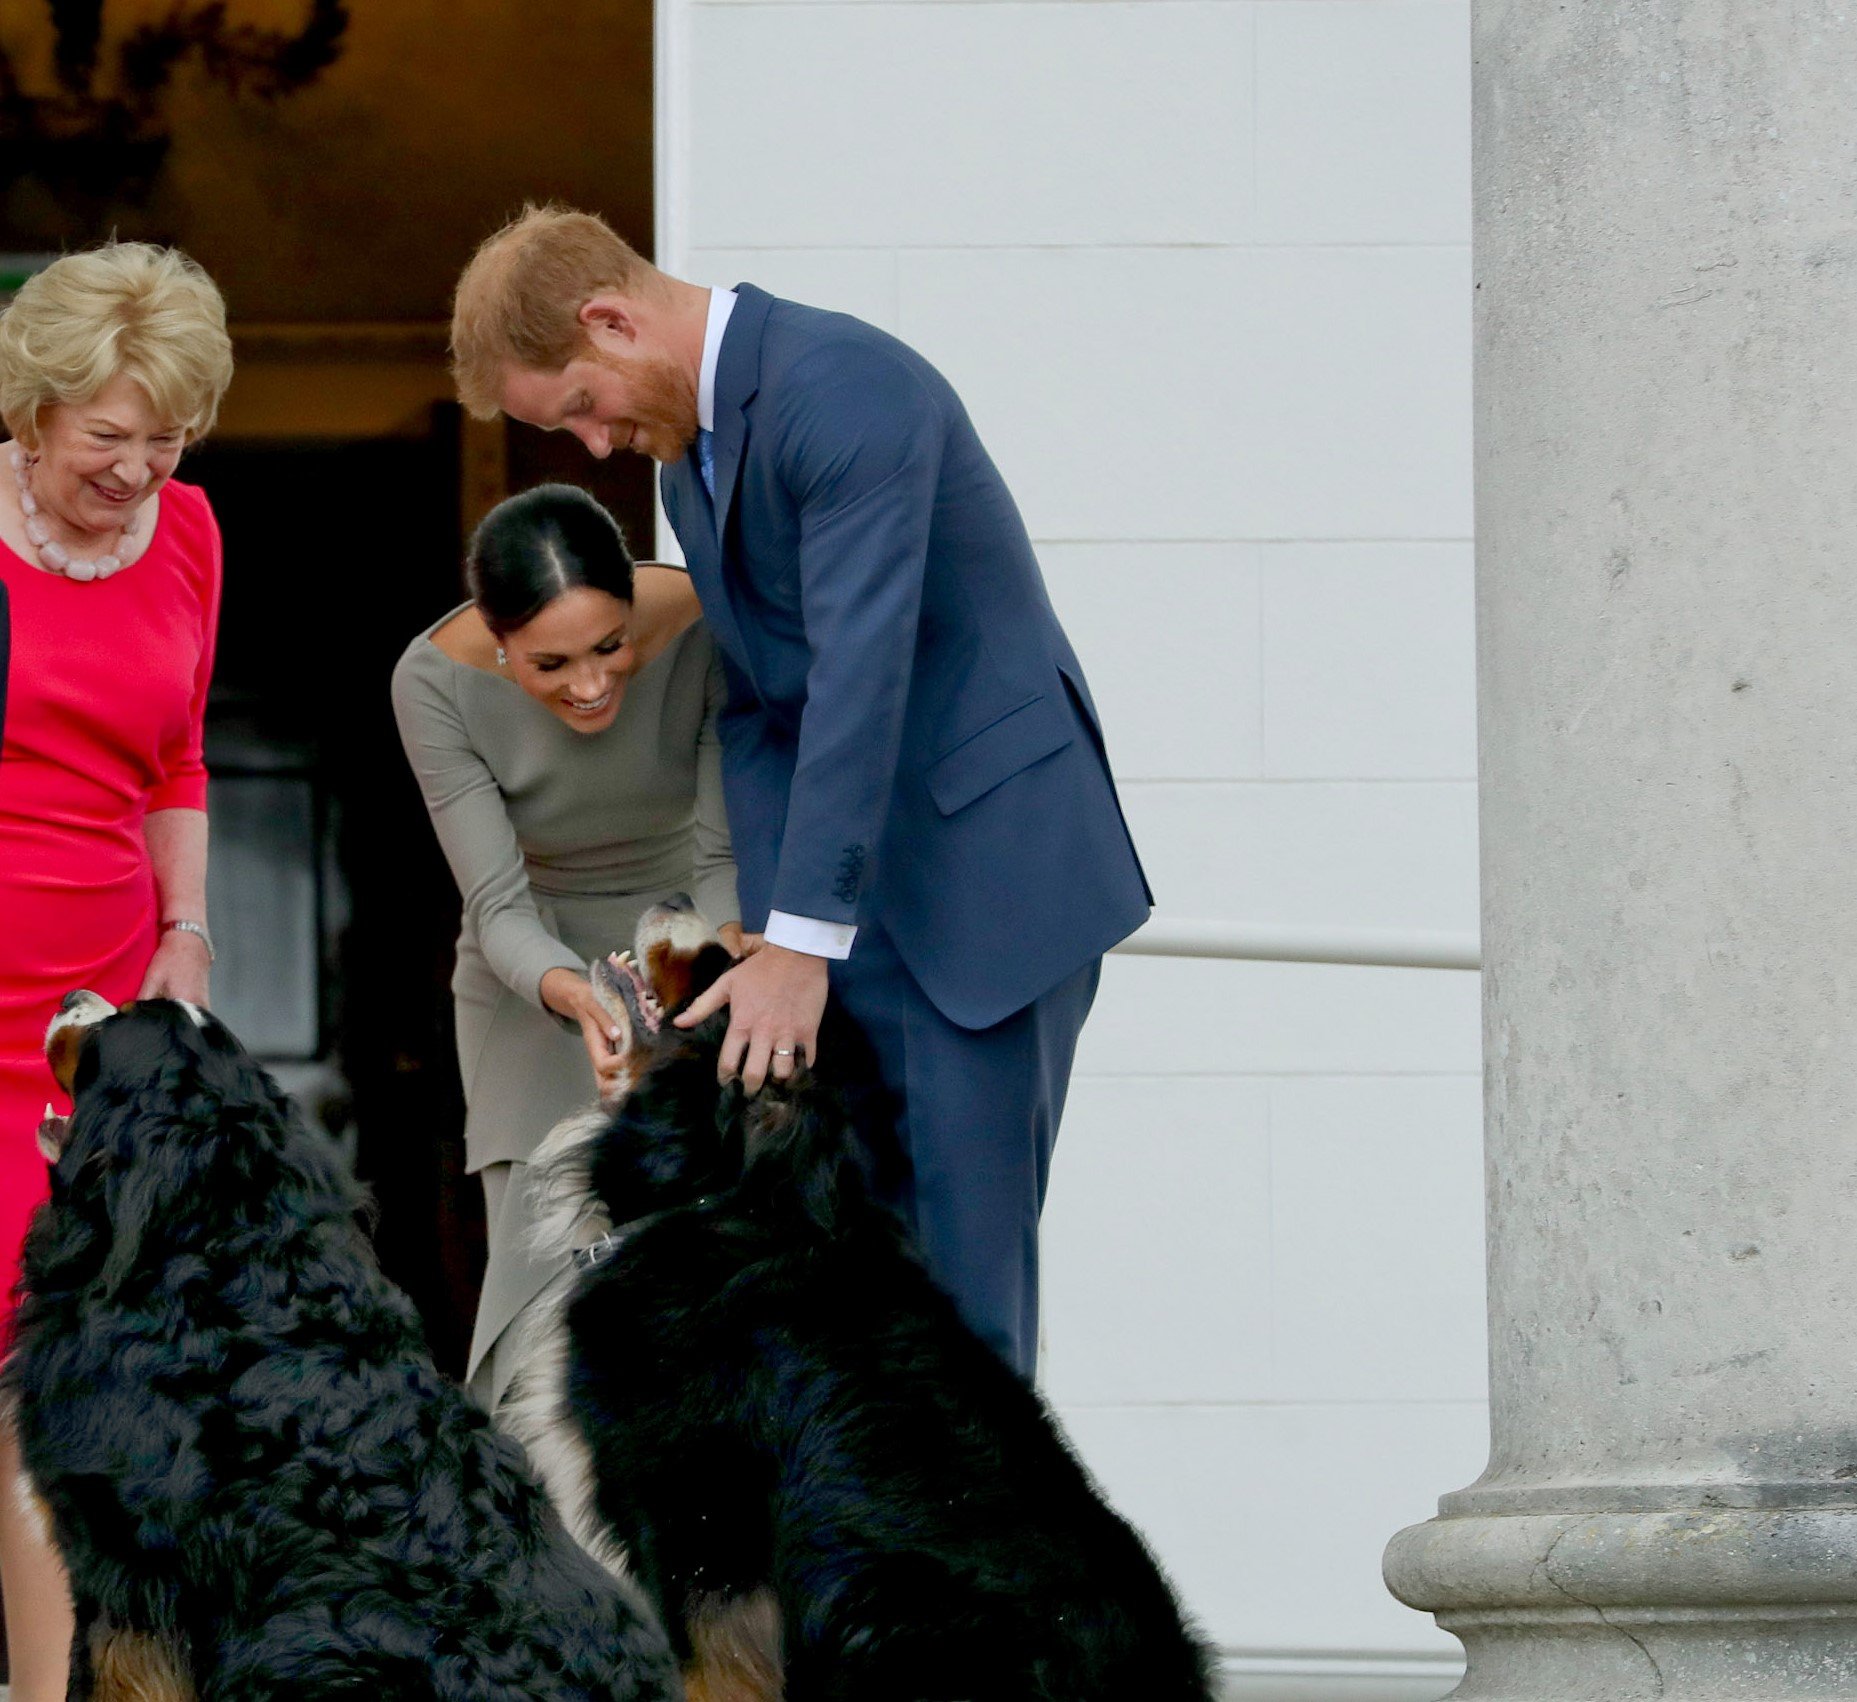 Meghan Markle and Prince Harry greet the President of Ireland's dog